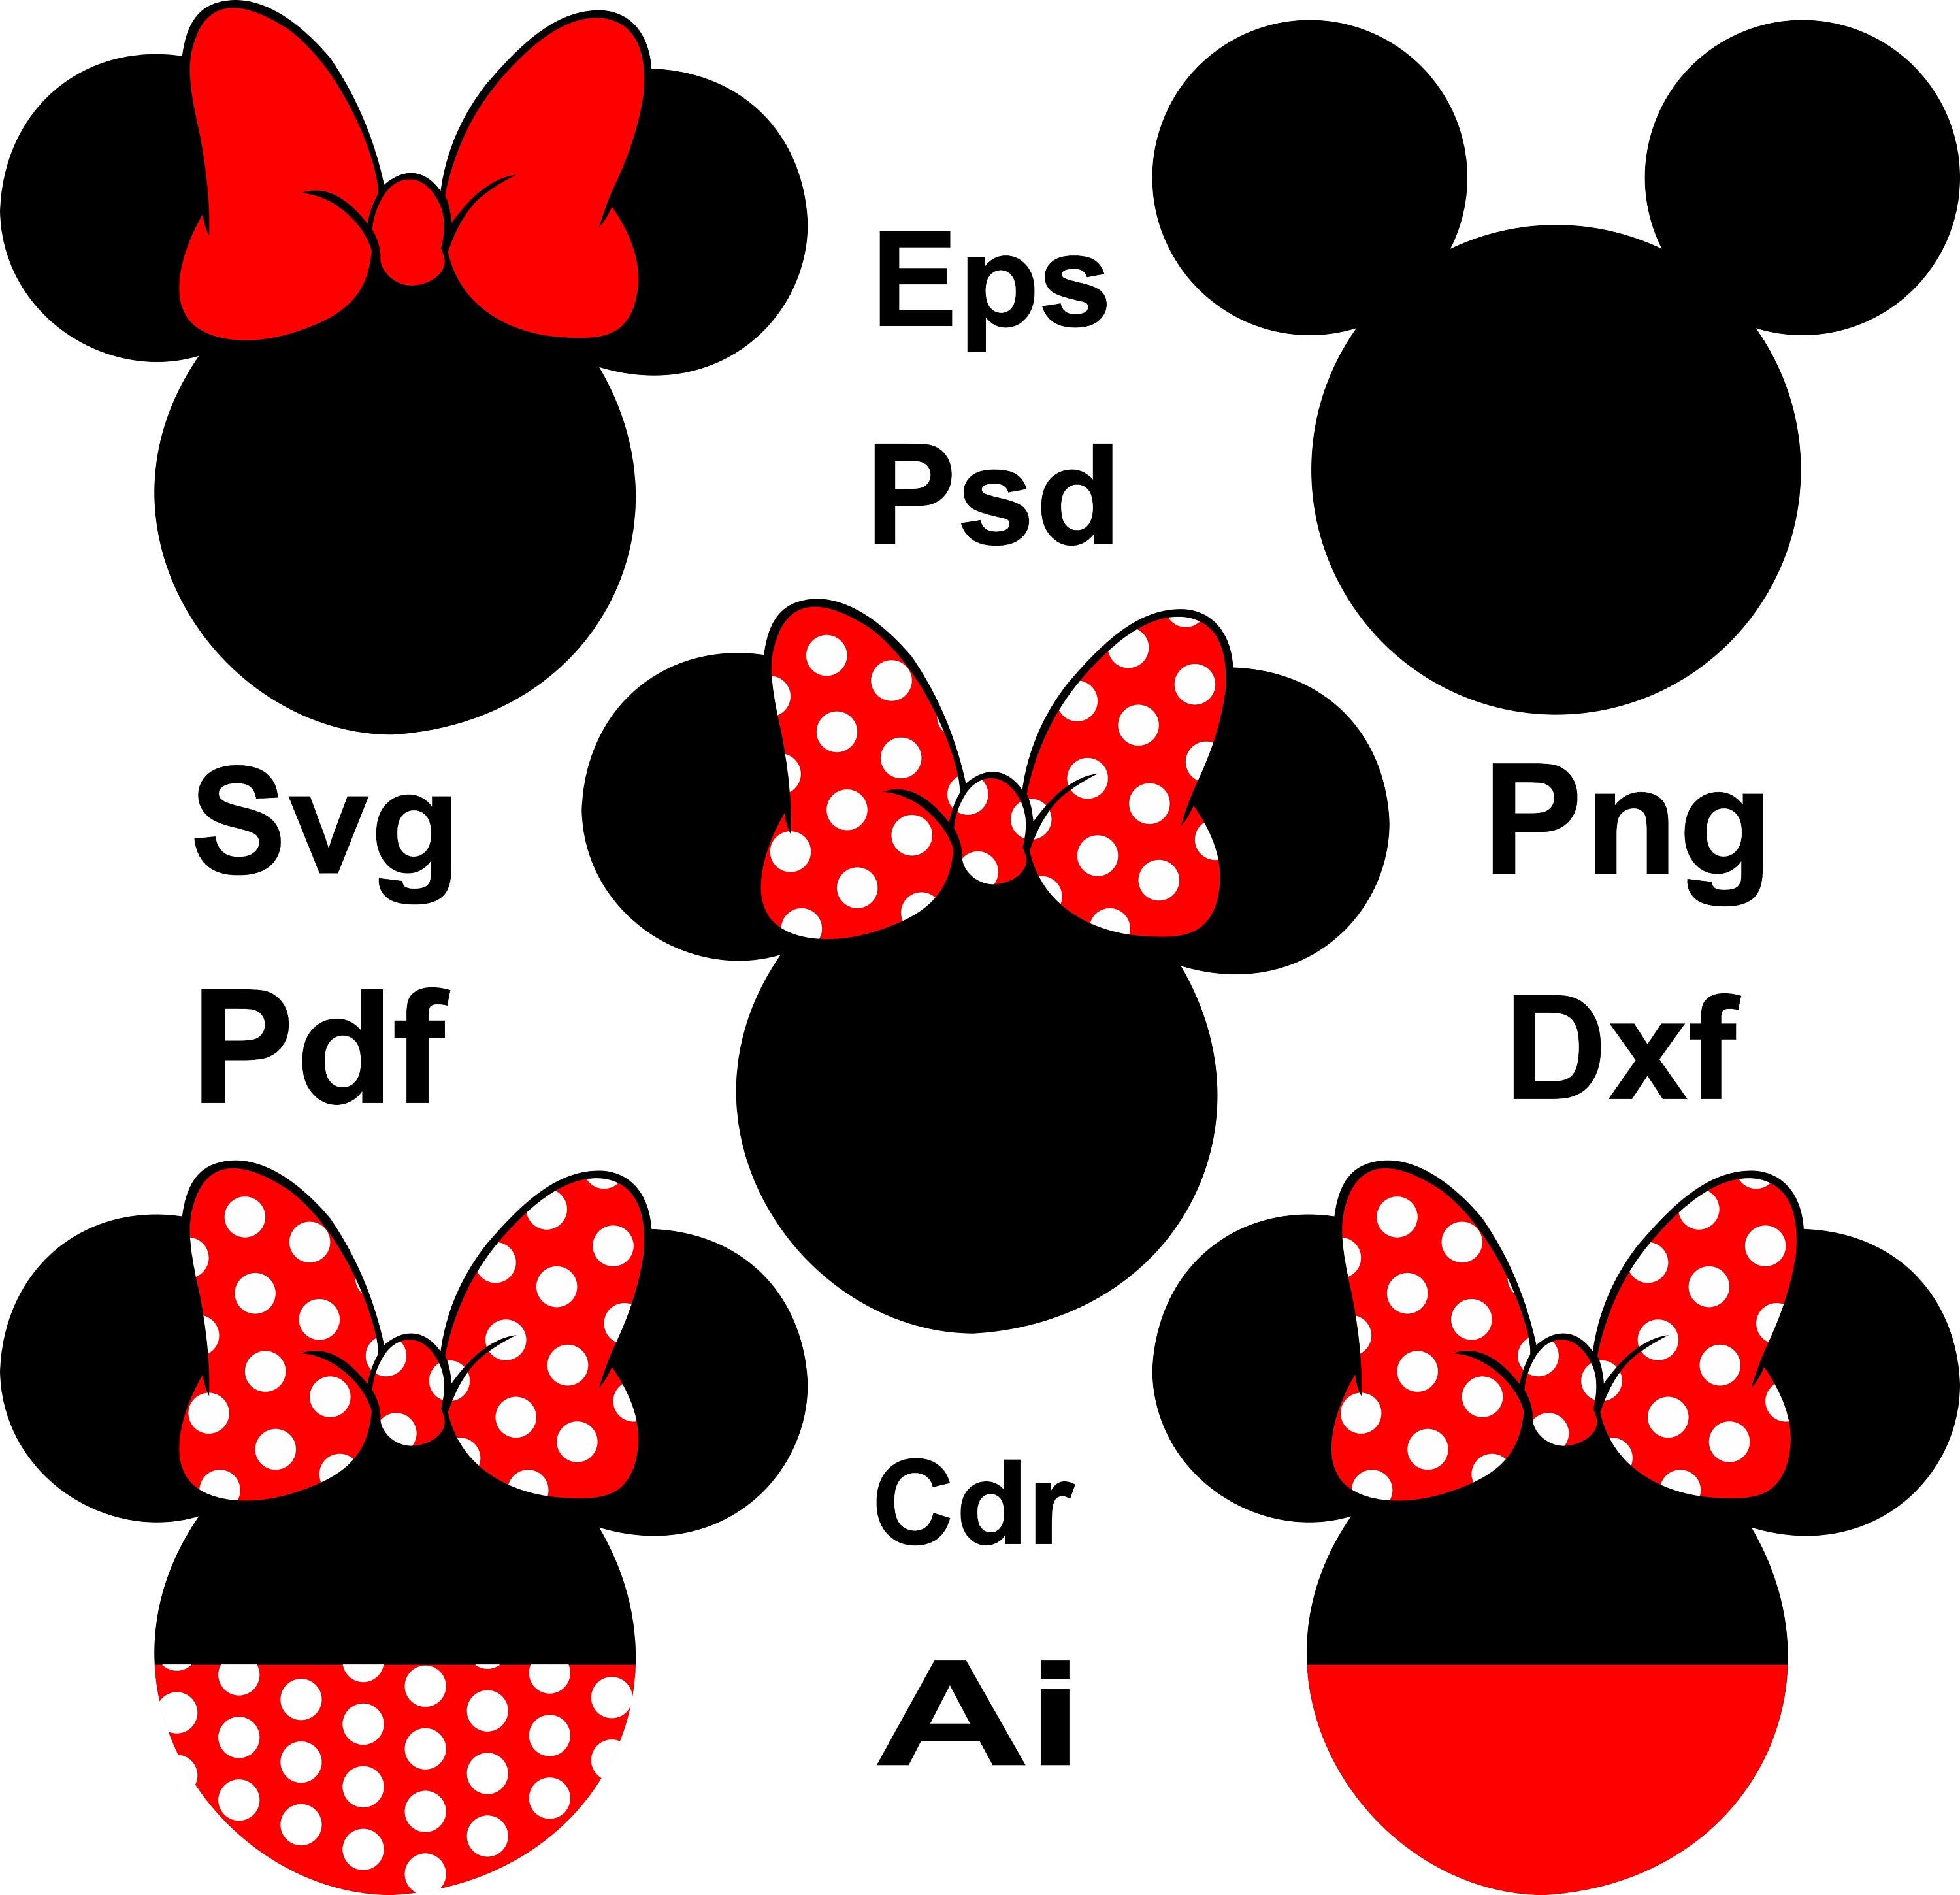 Download 70% off, Mickey Mouse Svg, Mickey Mouse Monogram, Mickey ...